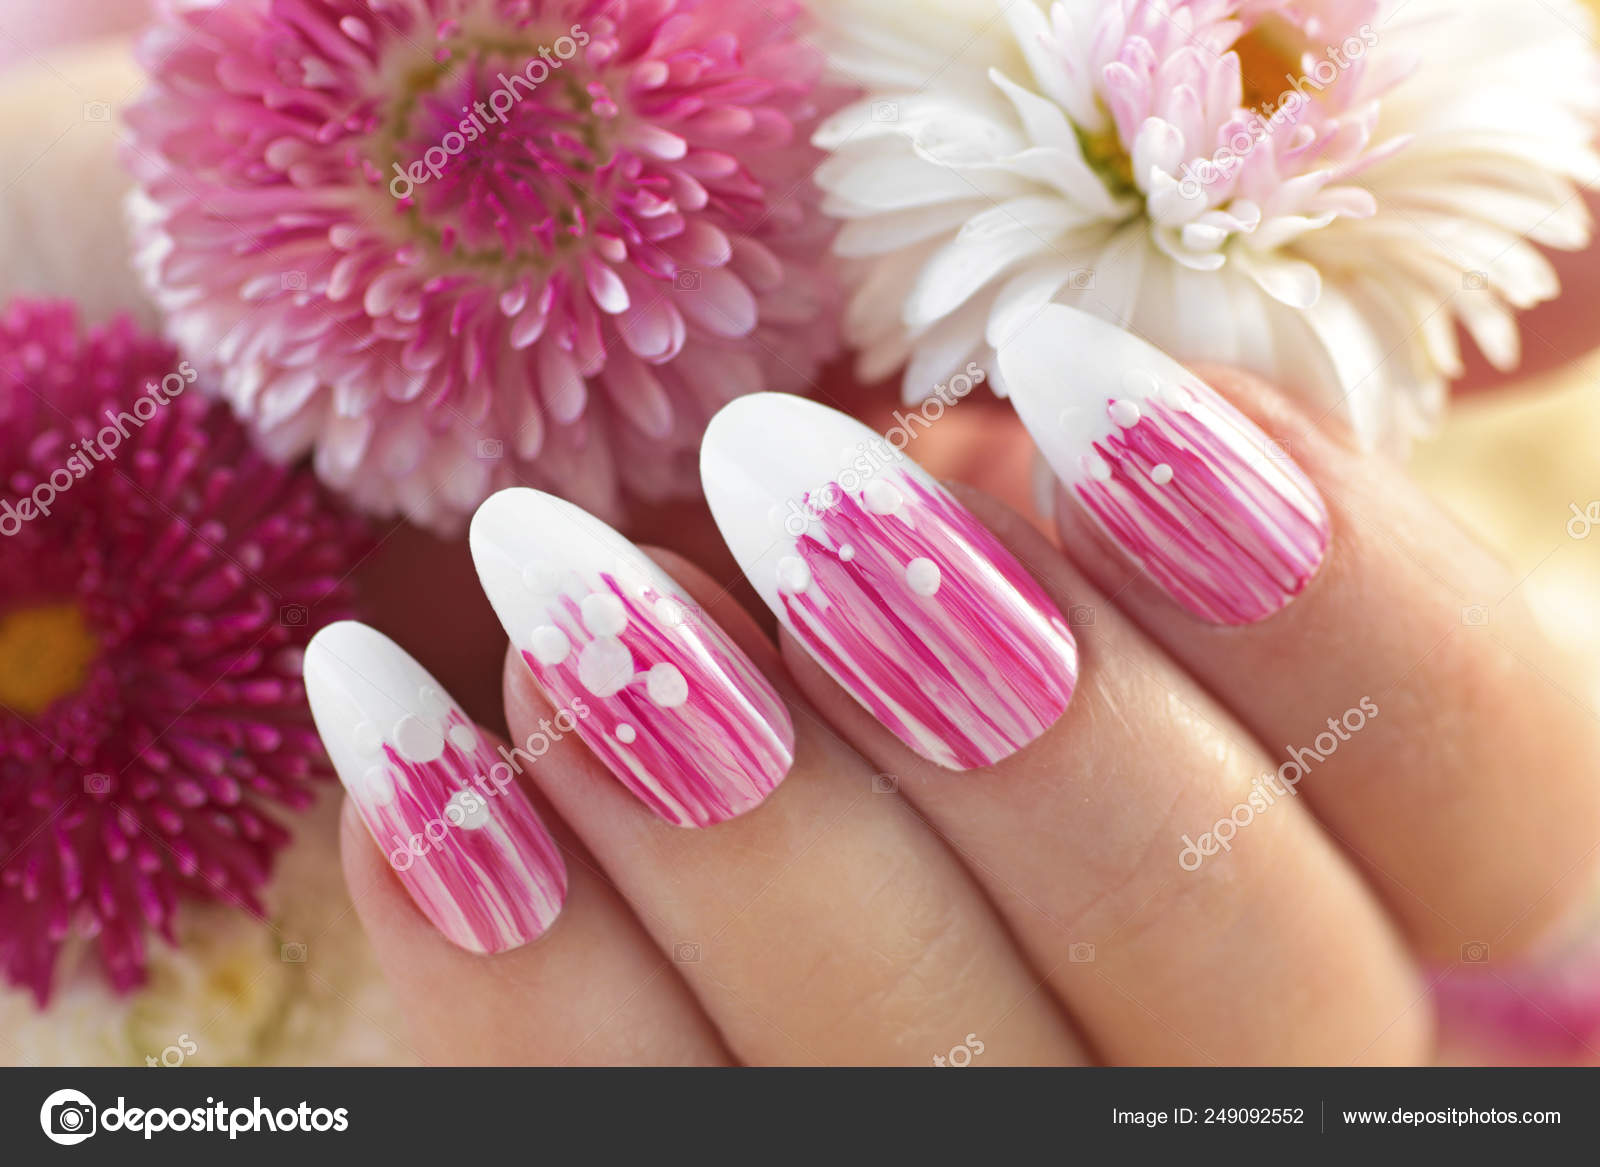 30 Oval Nail Designs That Will Inspire Your Next Manicure - Short Nail Ideas